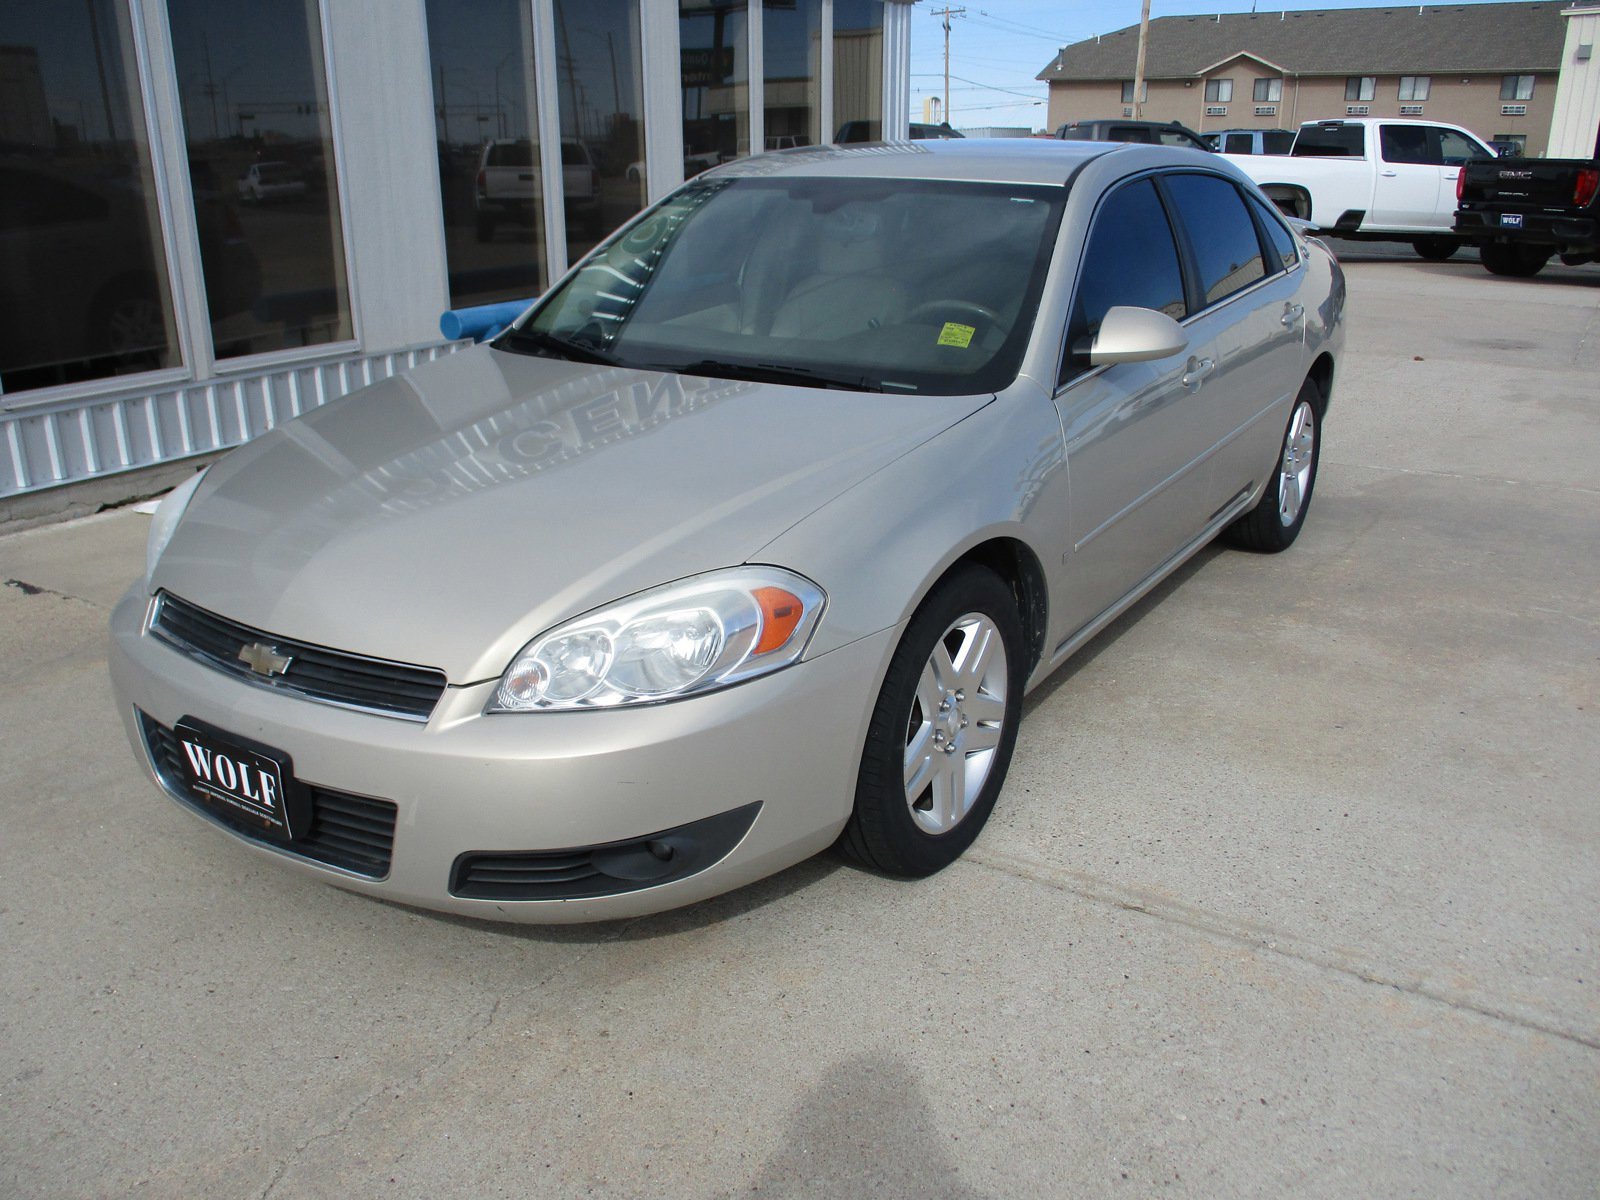 Used 2008 Chevrolet Impala LT with VIN 2G1WC583181258257 for sale in Ogallala, NE